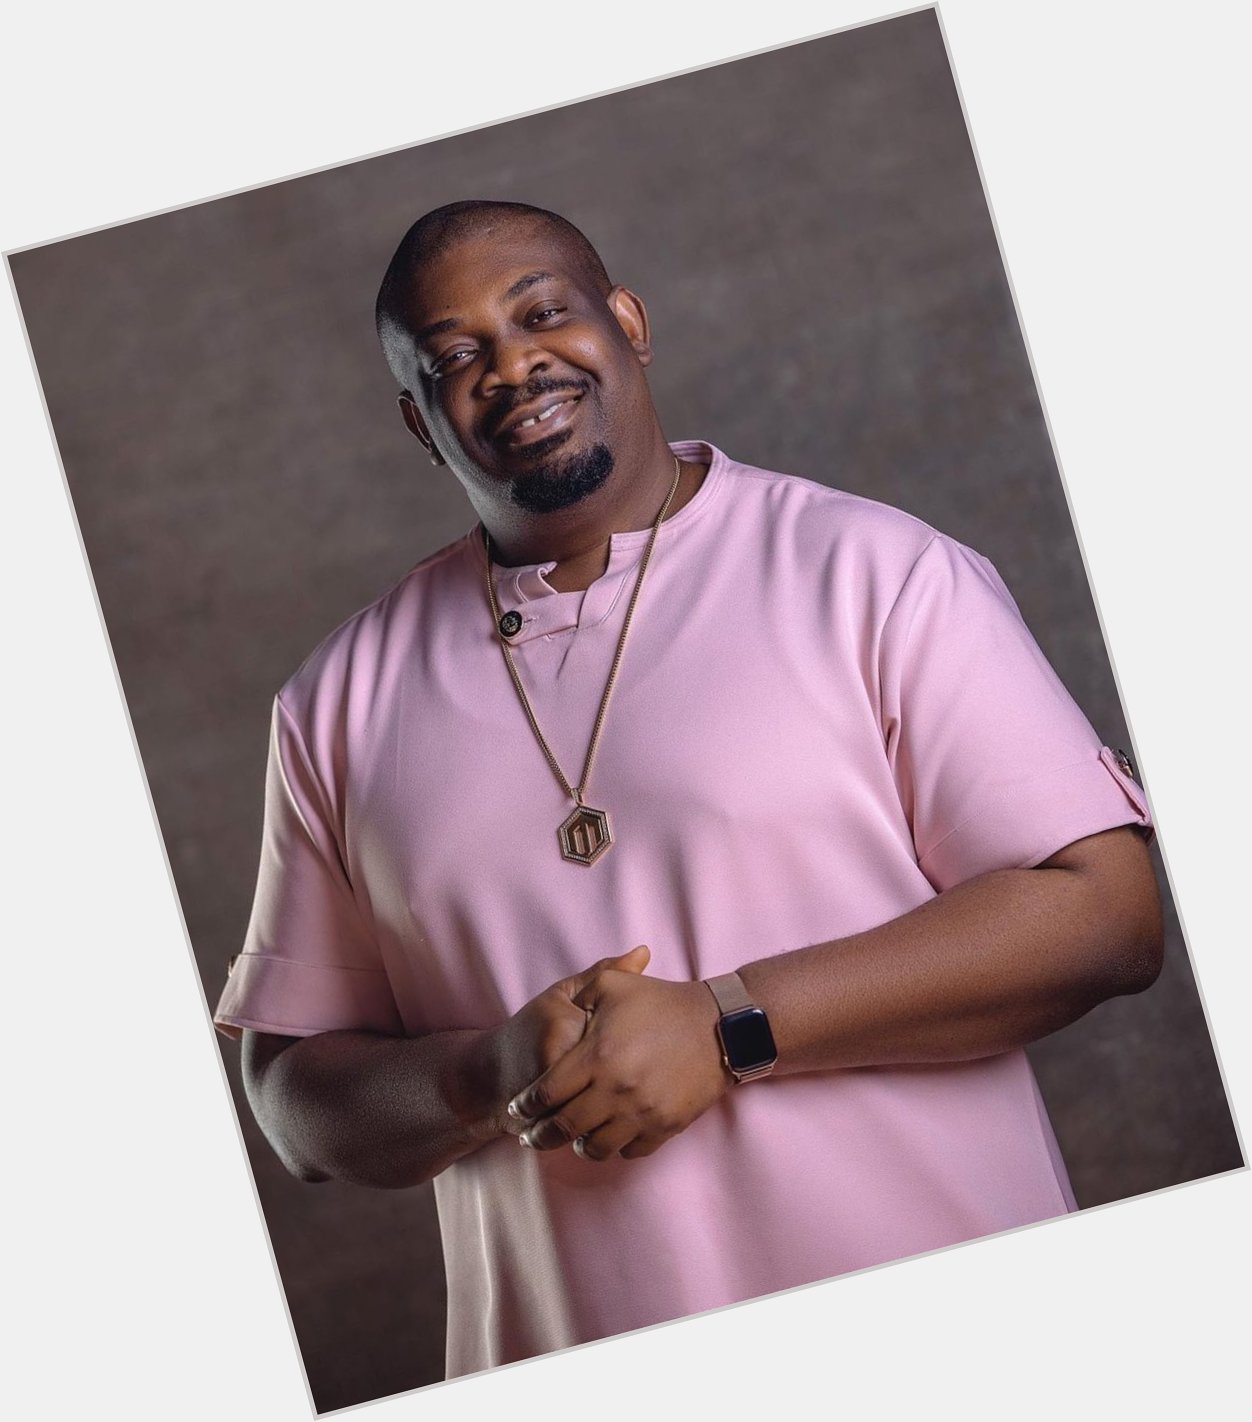 Happy birthday Boss Don Jazzy 
An ESOCS member wishing you a better life 